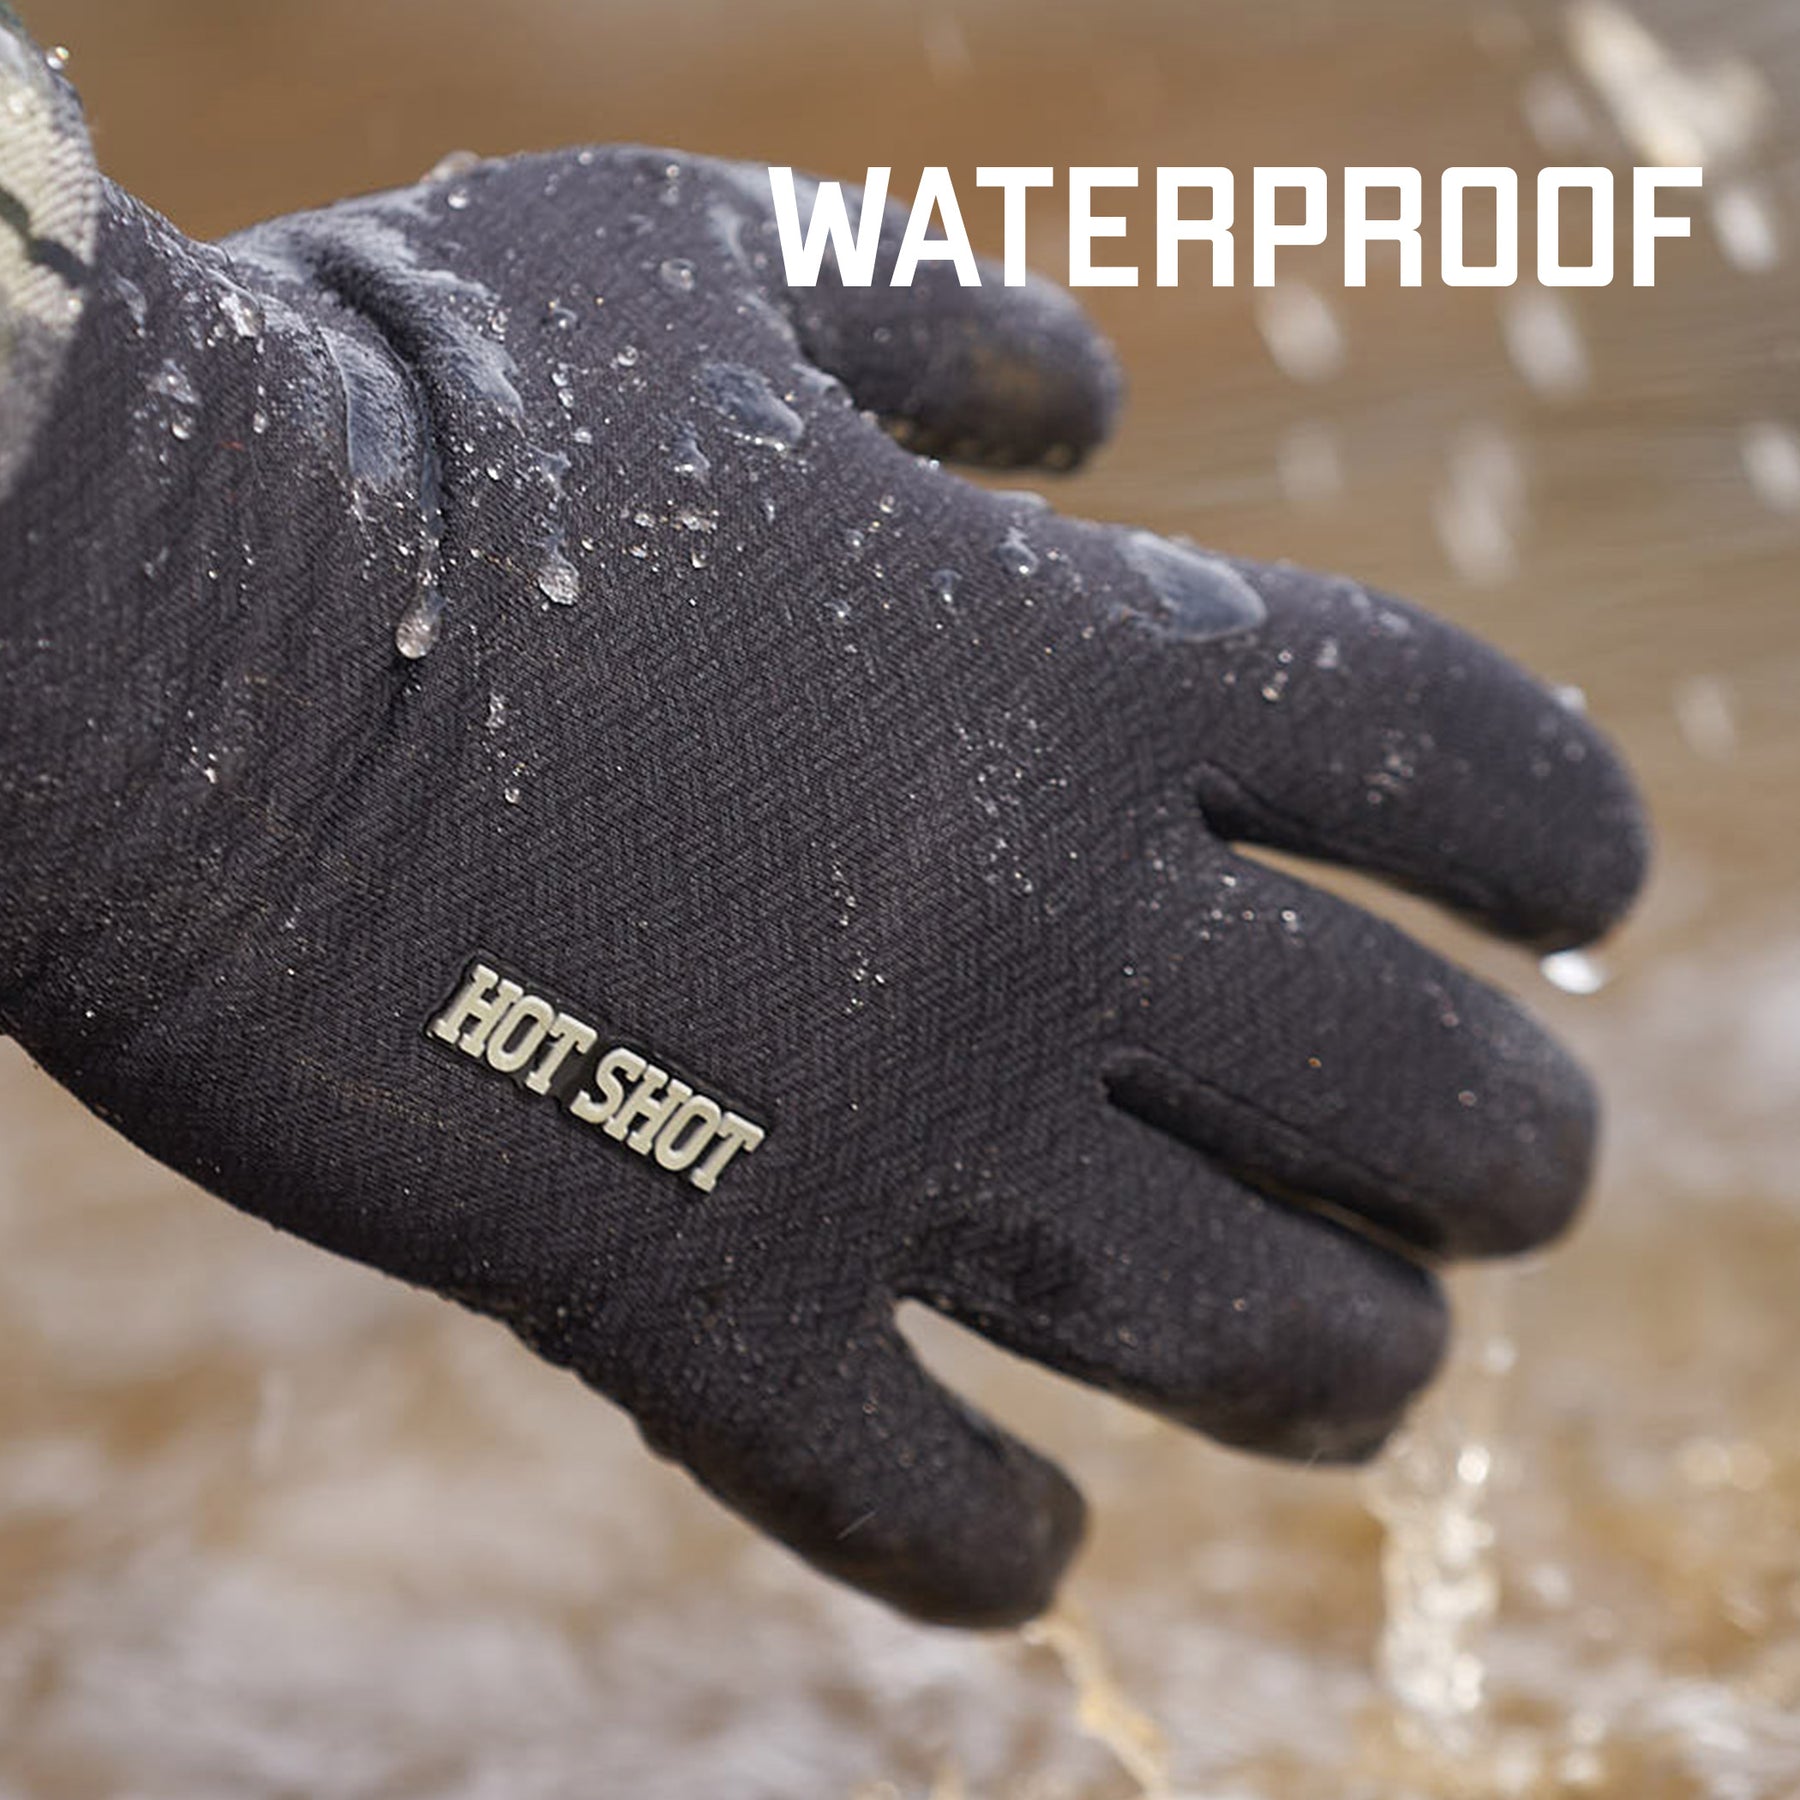 Inventive Fishing New Product Introduction: Buff Sun Gloves and Sleeves at  Icast 2017 